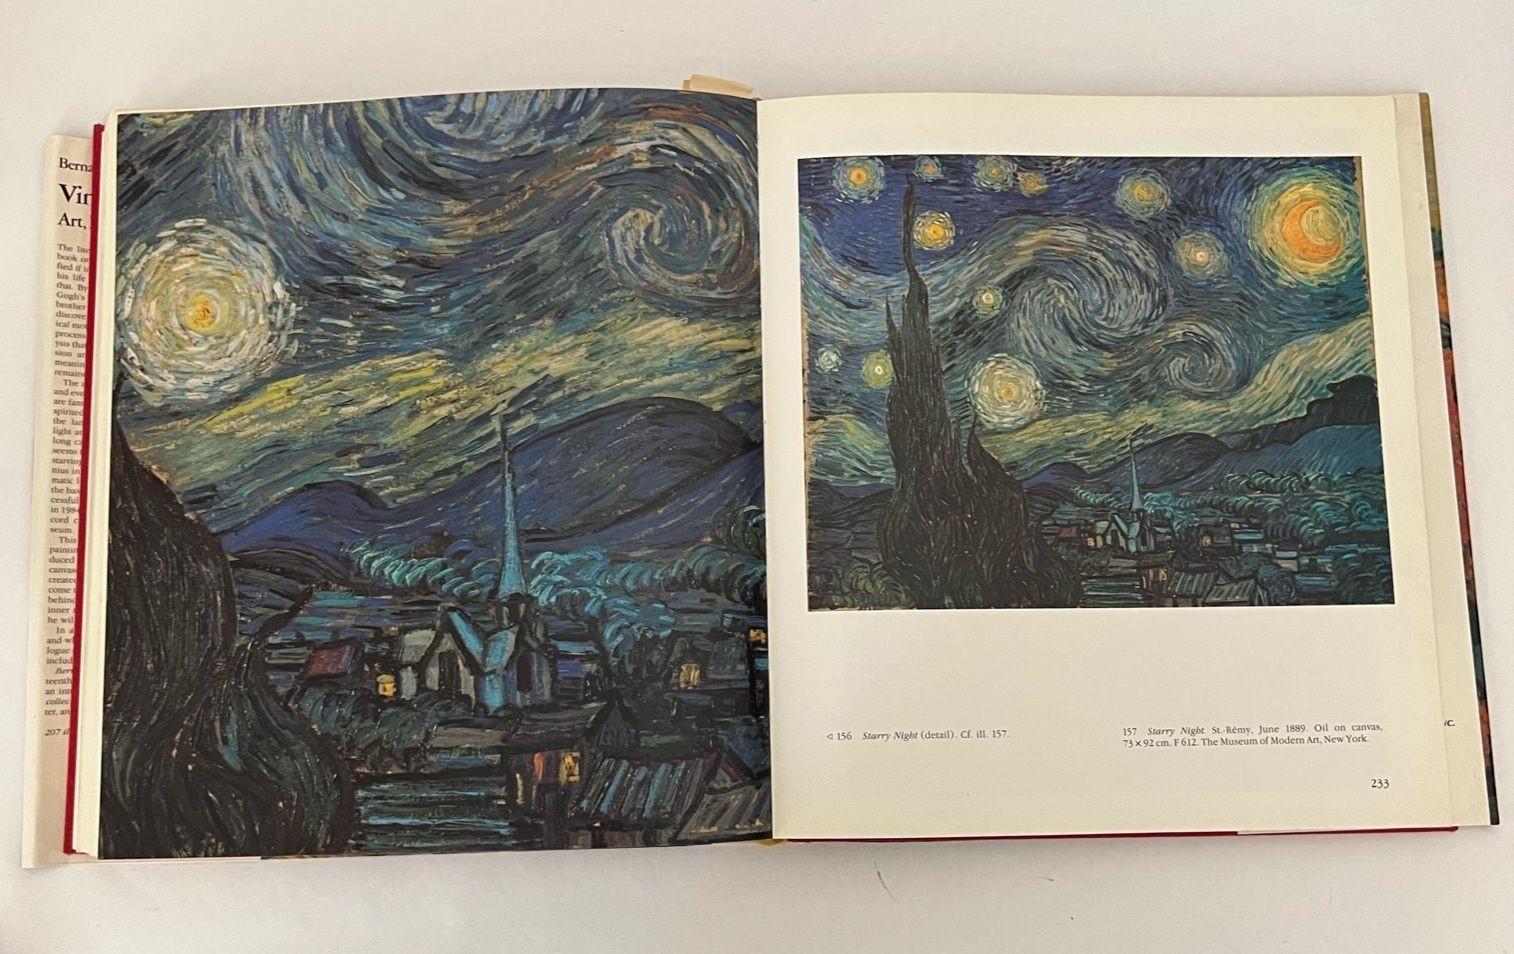 Paper 1985 Vincent Van Gogh Art Life and Letters by Bernard Zucker Hardcover Rizzolli For Sale